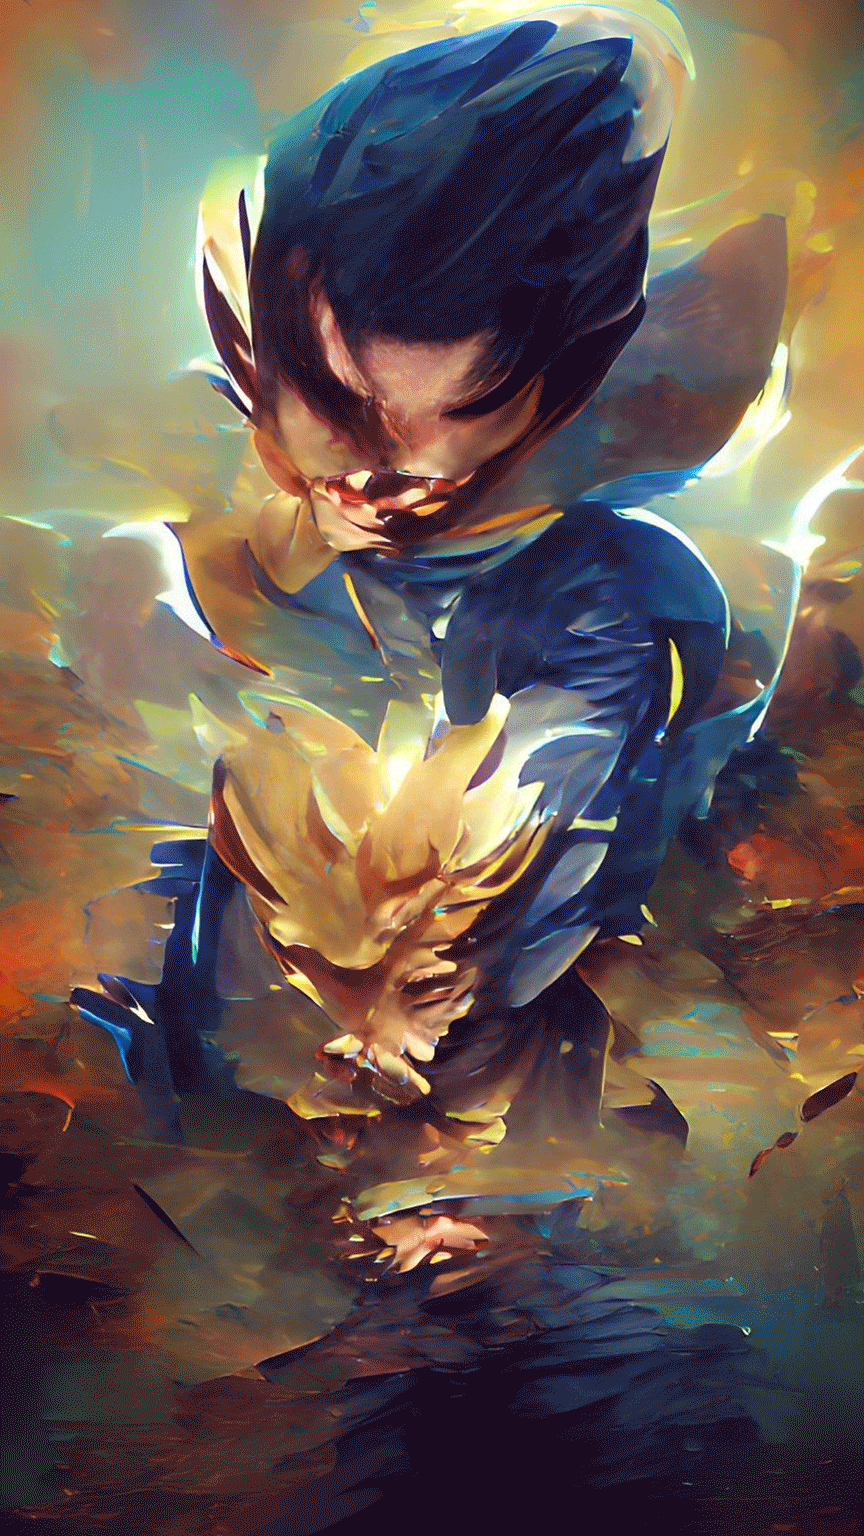 AI gerenated Inspiration image from Wombo Dream app with word prompt "vegeta"